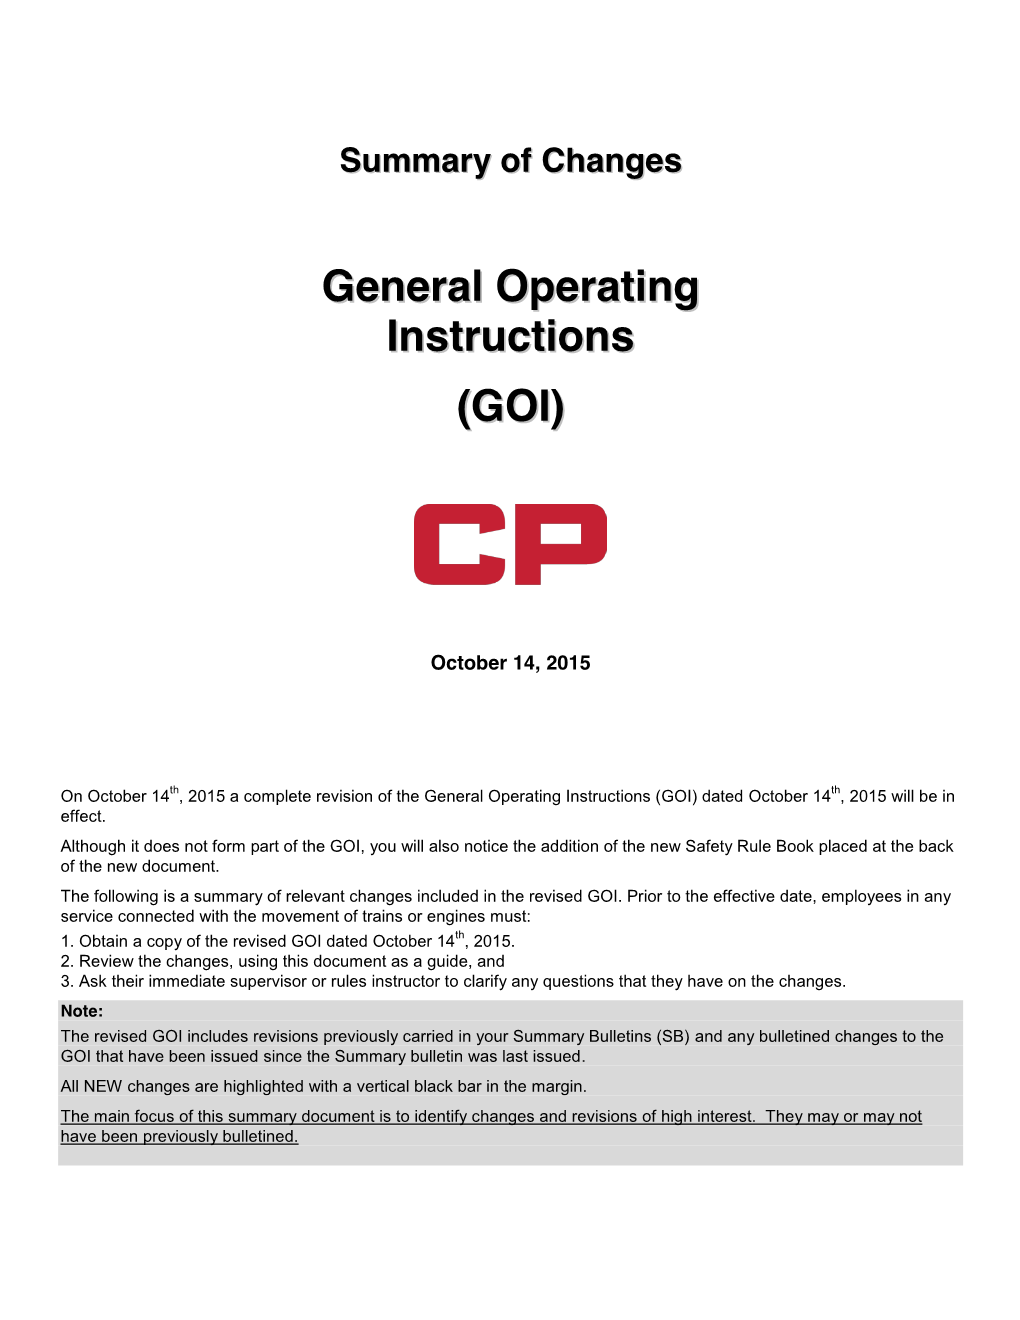 General Operating Instructions (GOI) Dated October 14Th, 2015 Will Be in Effect